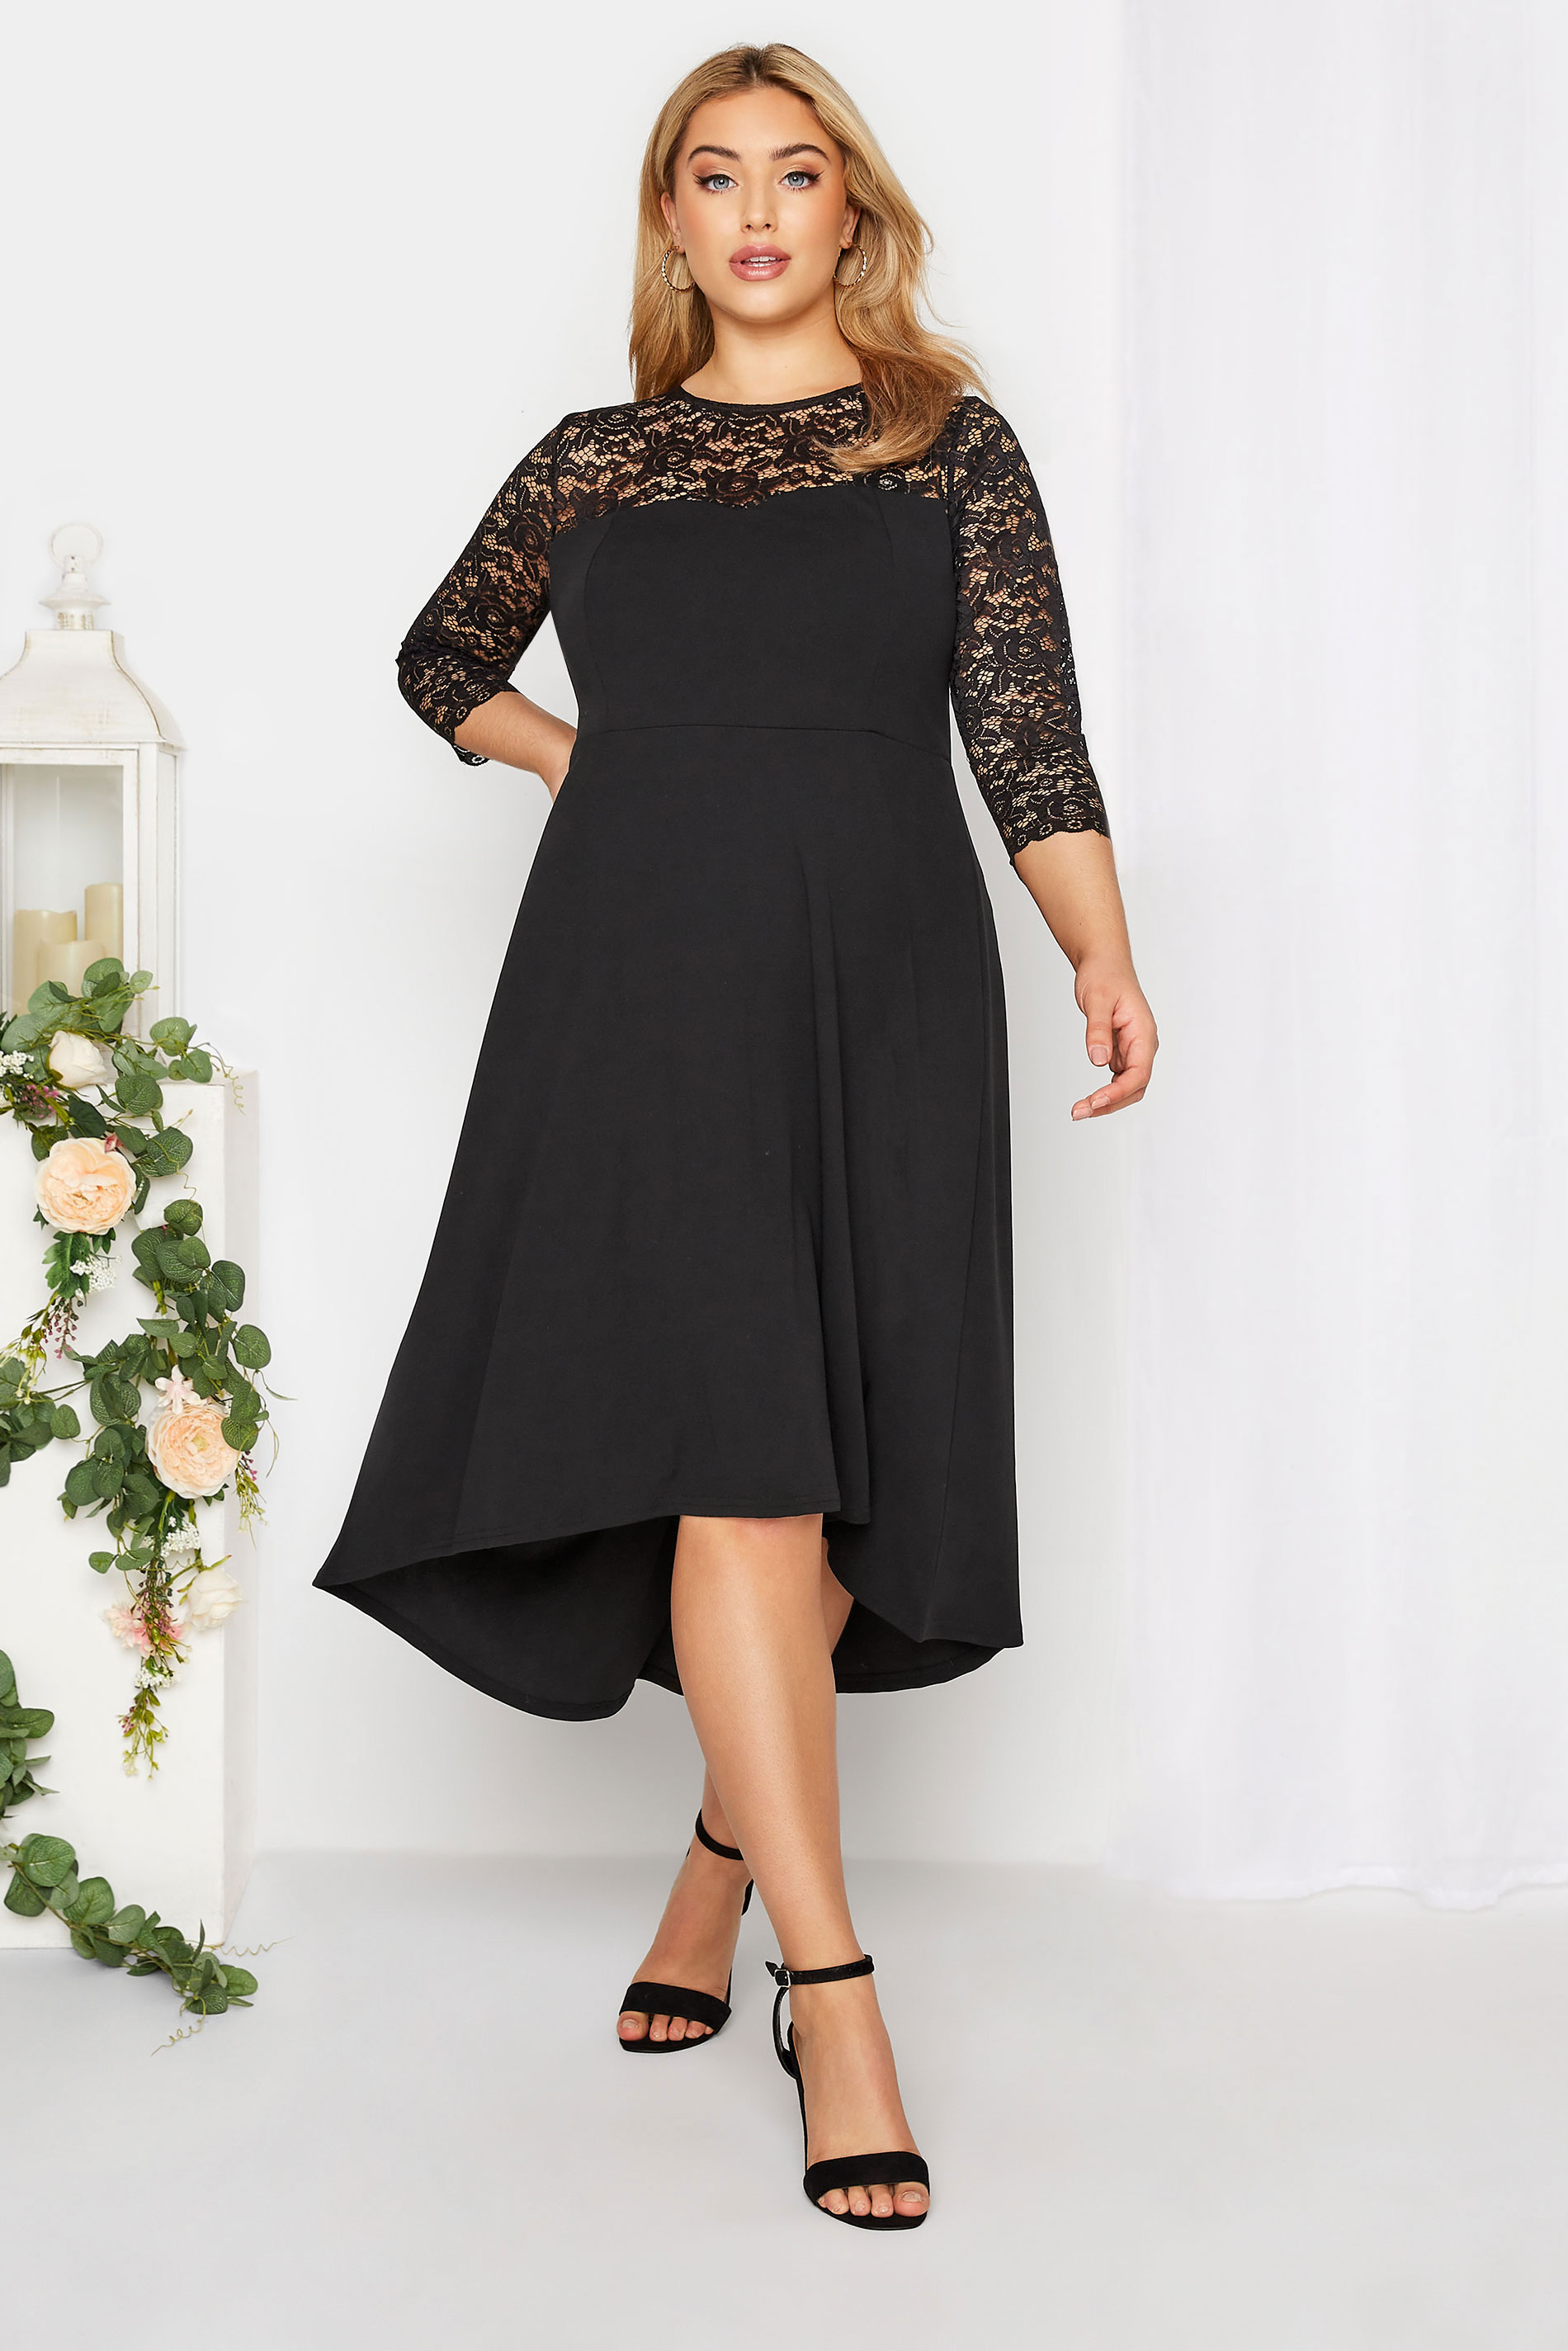 Robes Grande Taille Grande taille  Robes Dentelles | YOURS LONDON - Robe Noire Midi Encolure & Manches Dentelle - EY48503